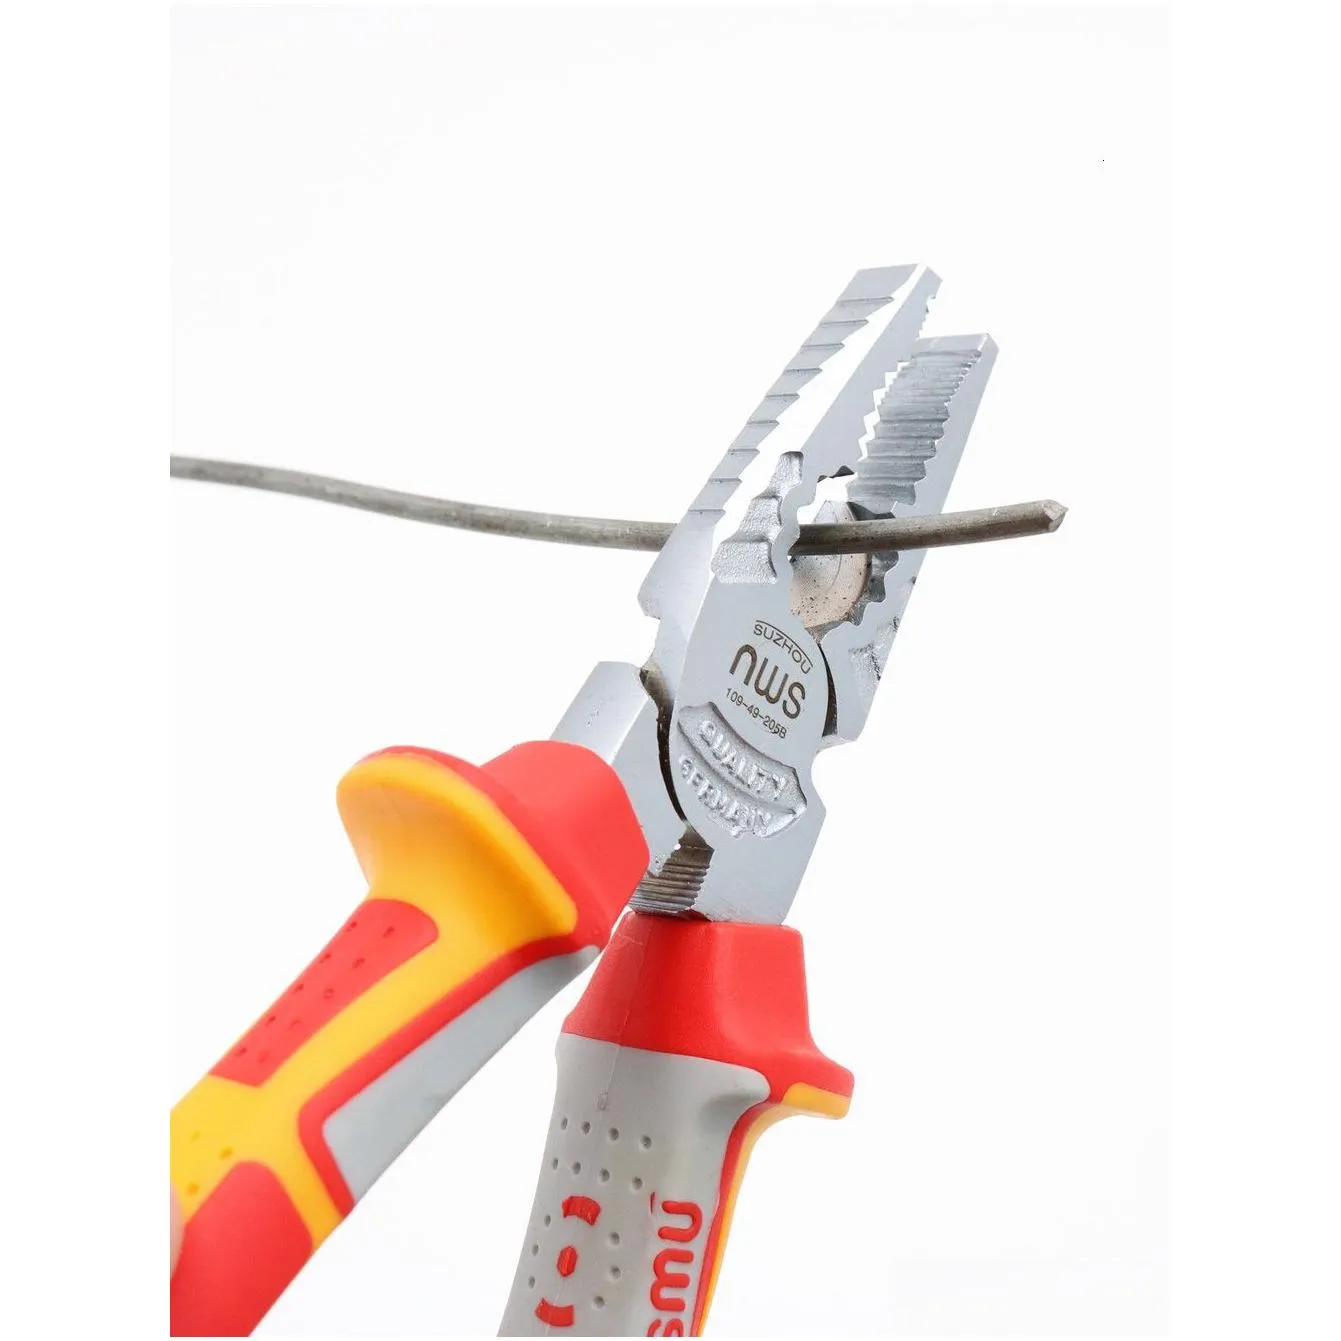 Pliers Smu Cutting Nose Professional Electrician Hardware Hand Tools 230606 Drop Delivery Dhuei